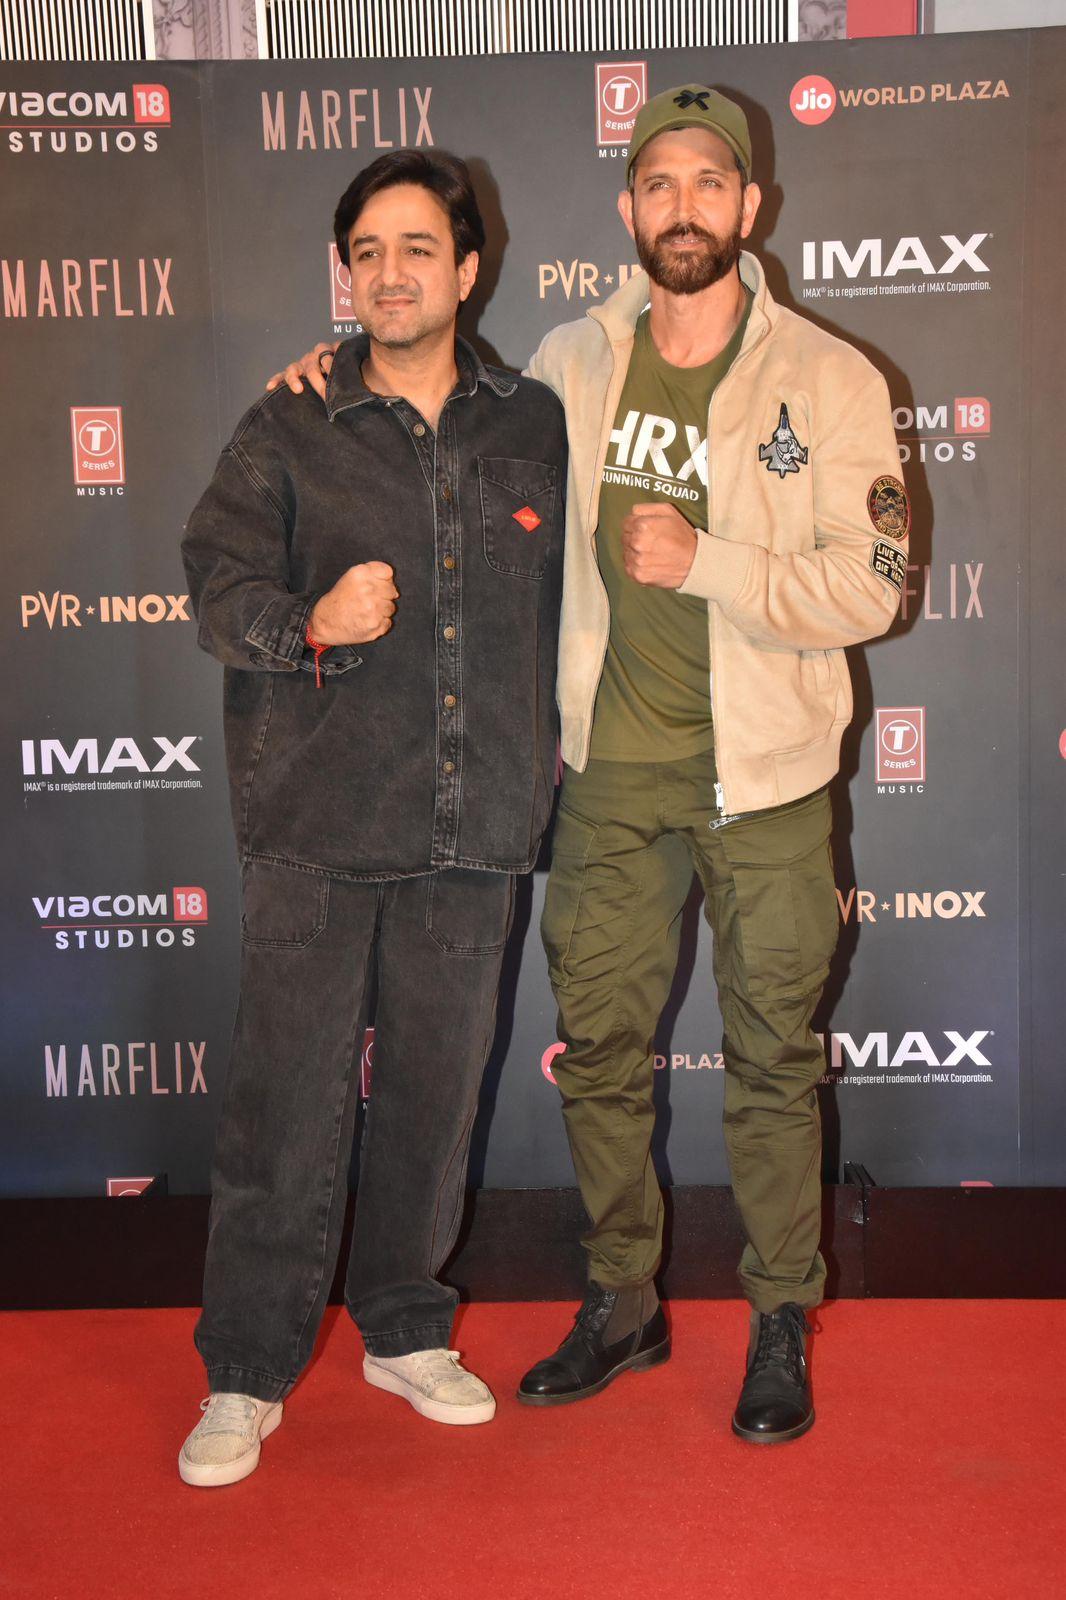 Hrithik Roshan posed with 'Fighter' director Siddharth Anand at the movie premiere